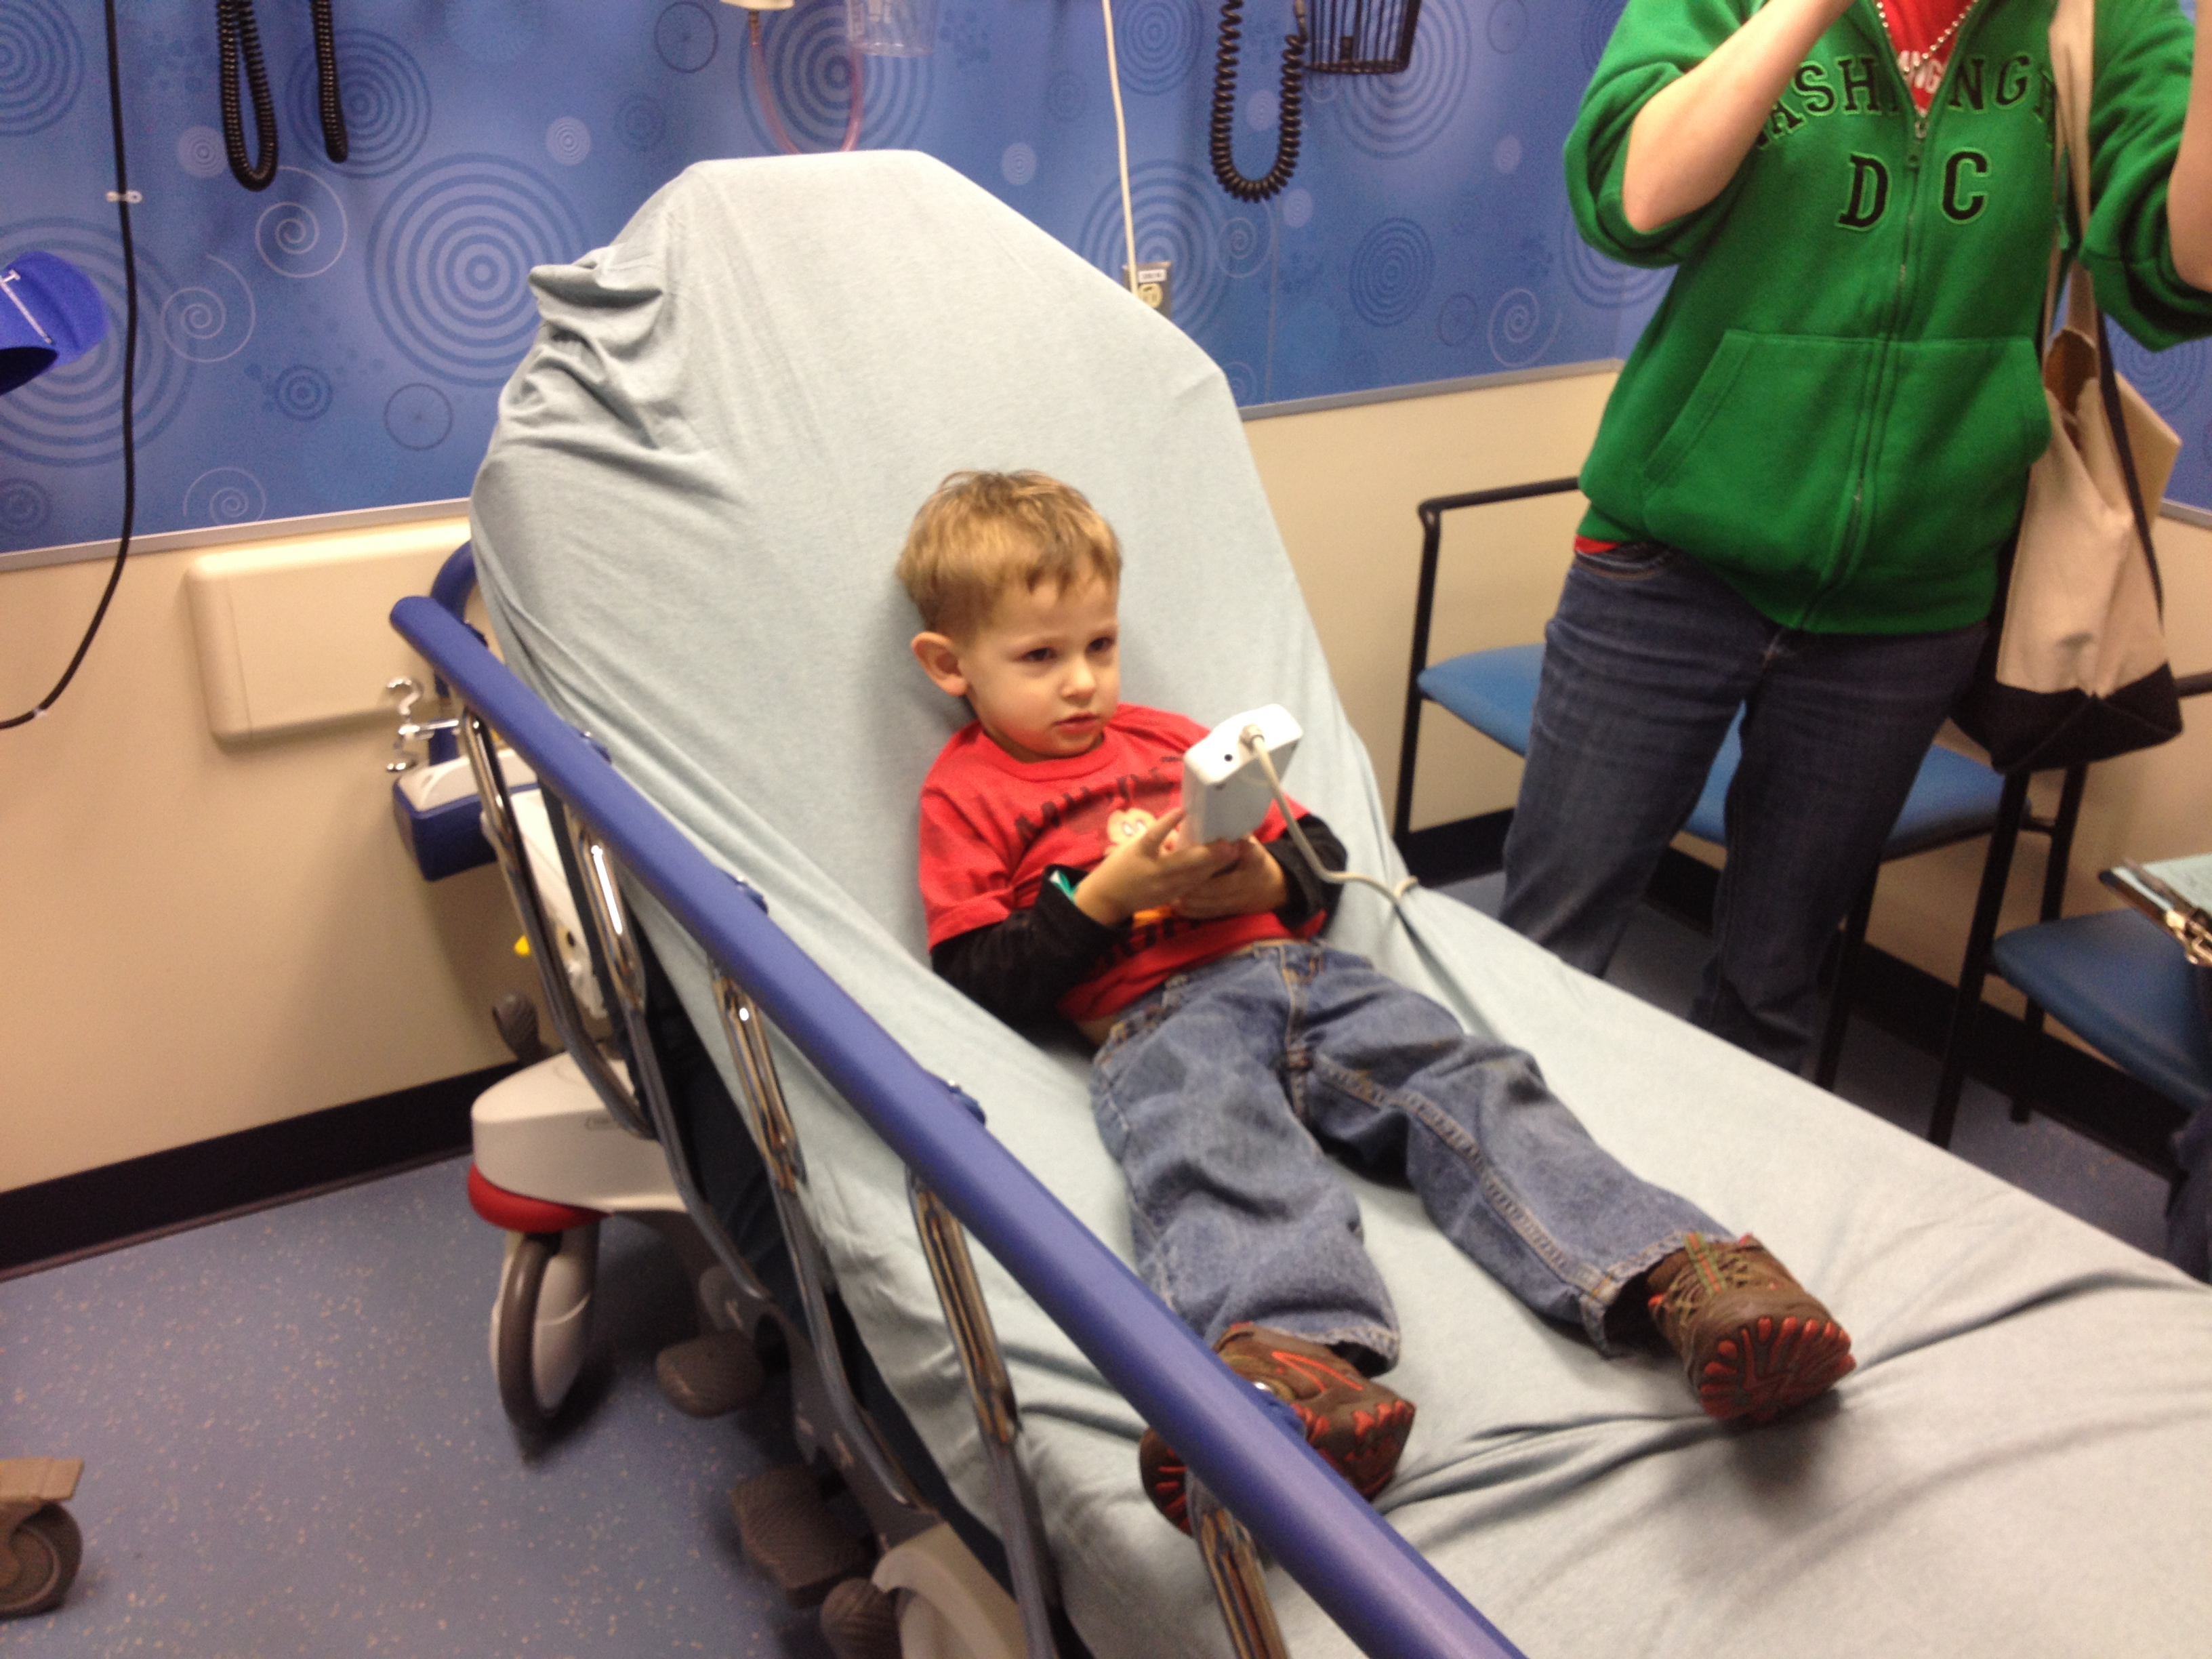 Luke at hospital with the remote.